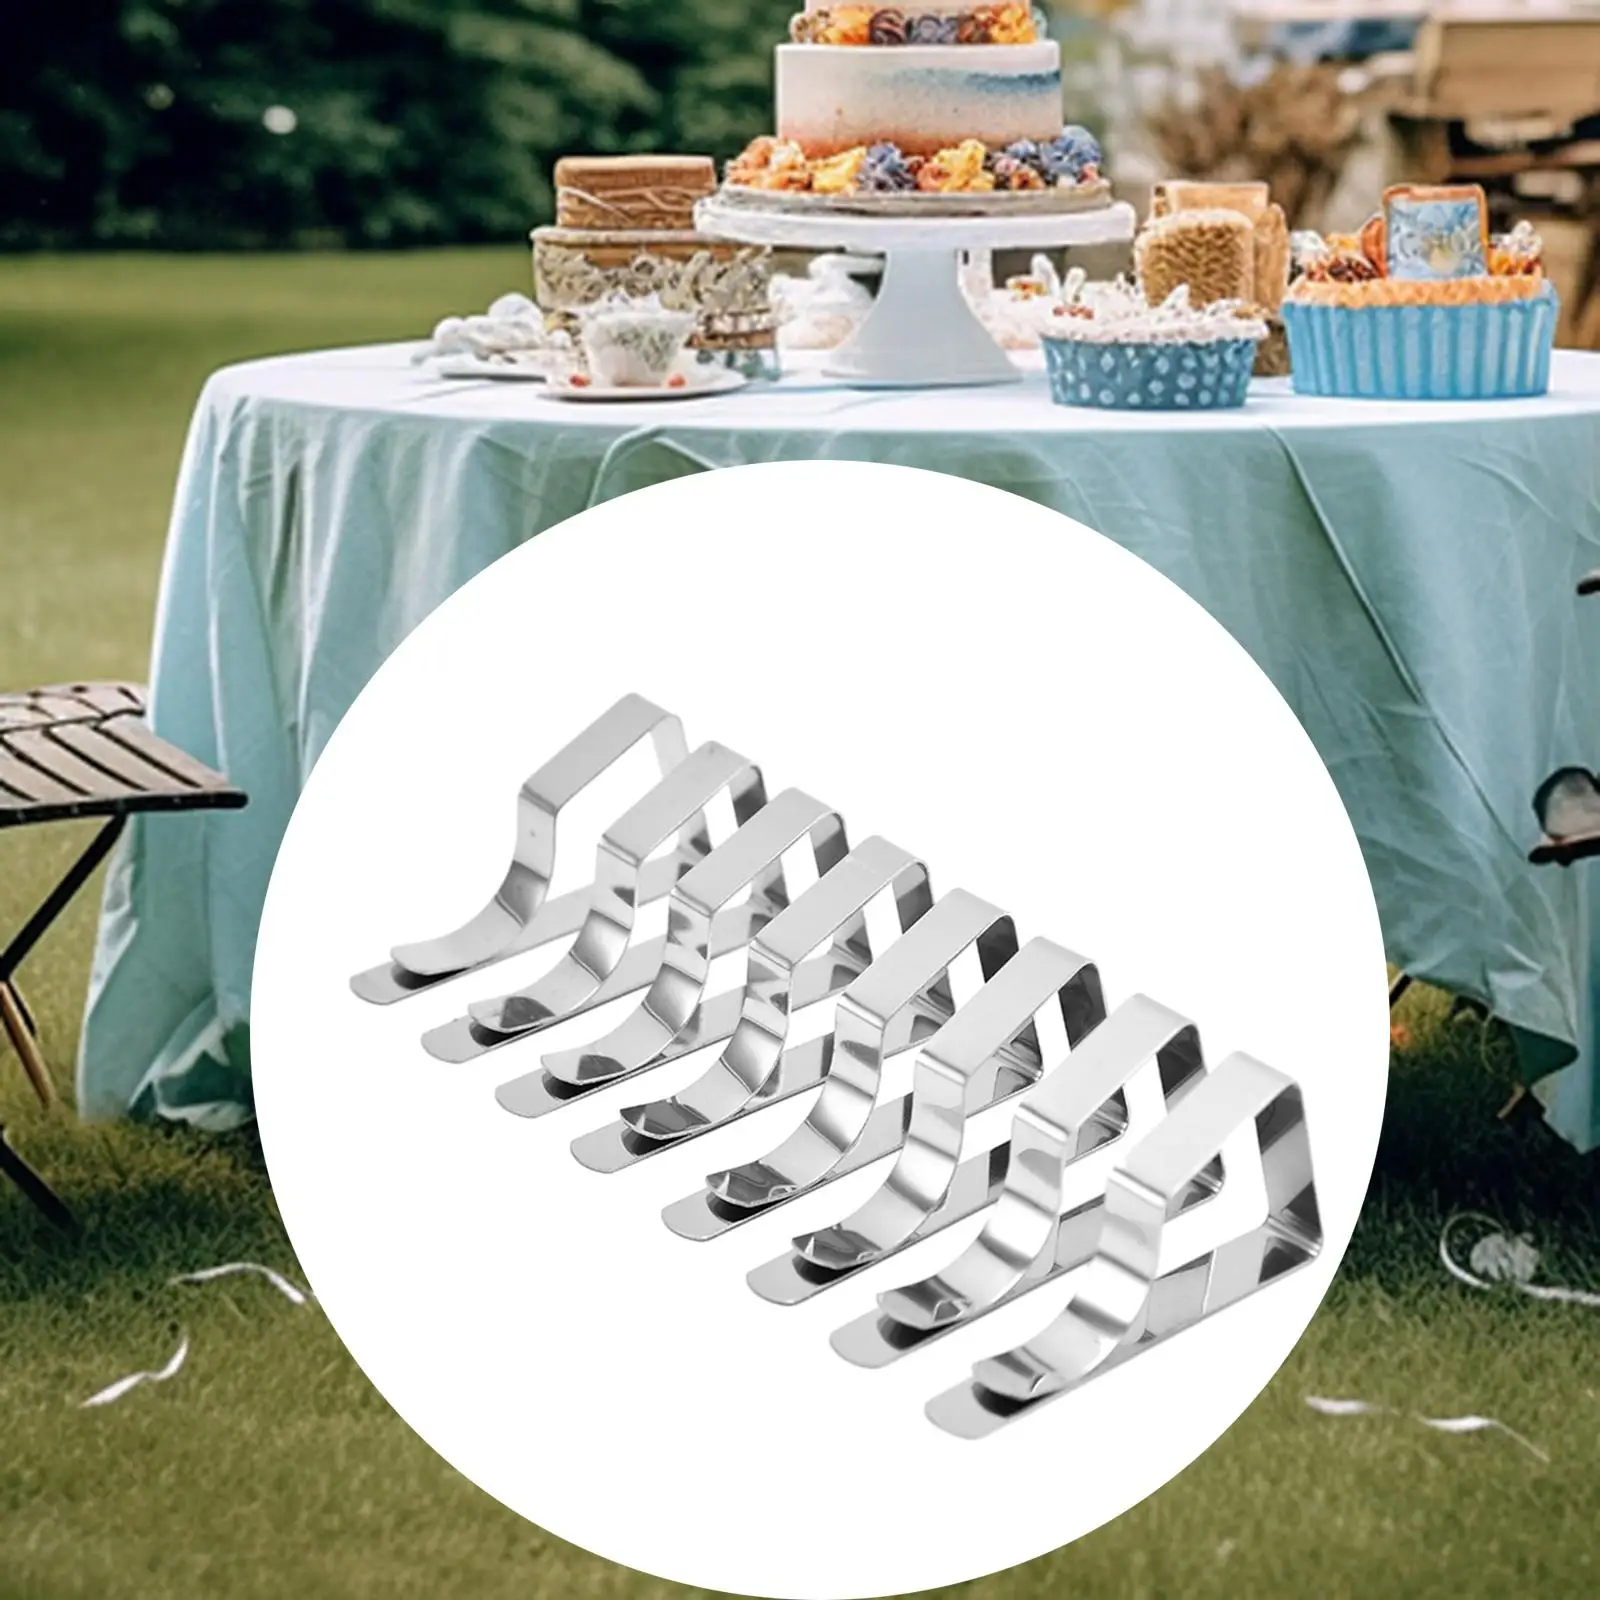 8x Tablecloth Clips Table Cloth Holding Clip Metal Tablecloth Clamps for Indoor Tables Dining Tables Outdoor Tables Home Wedding